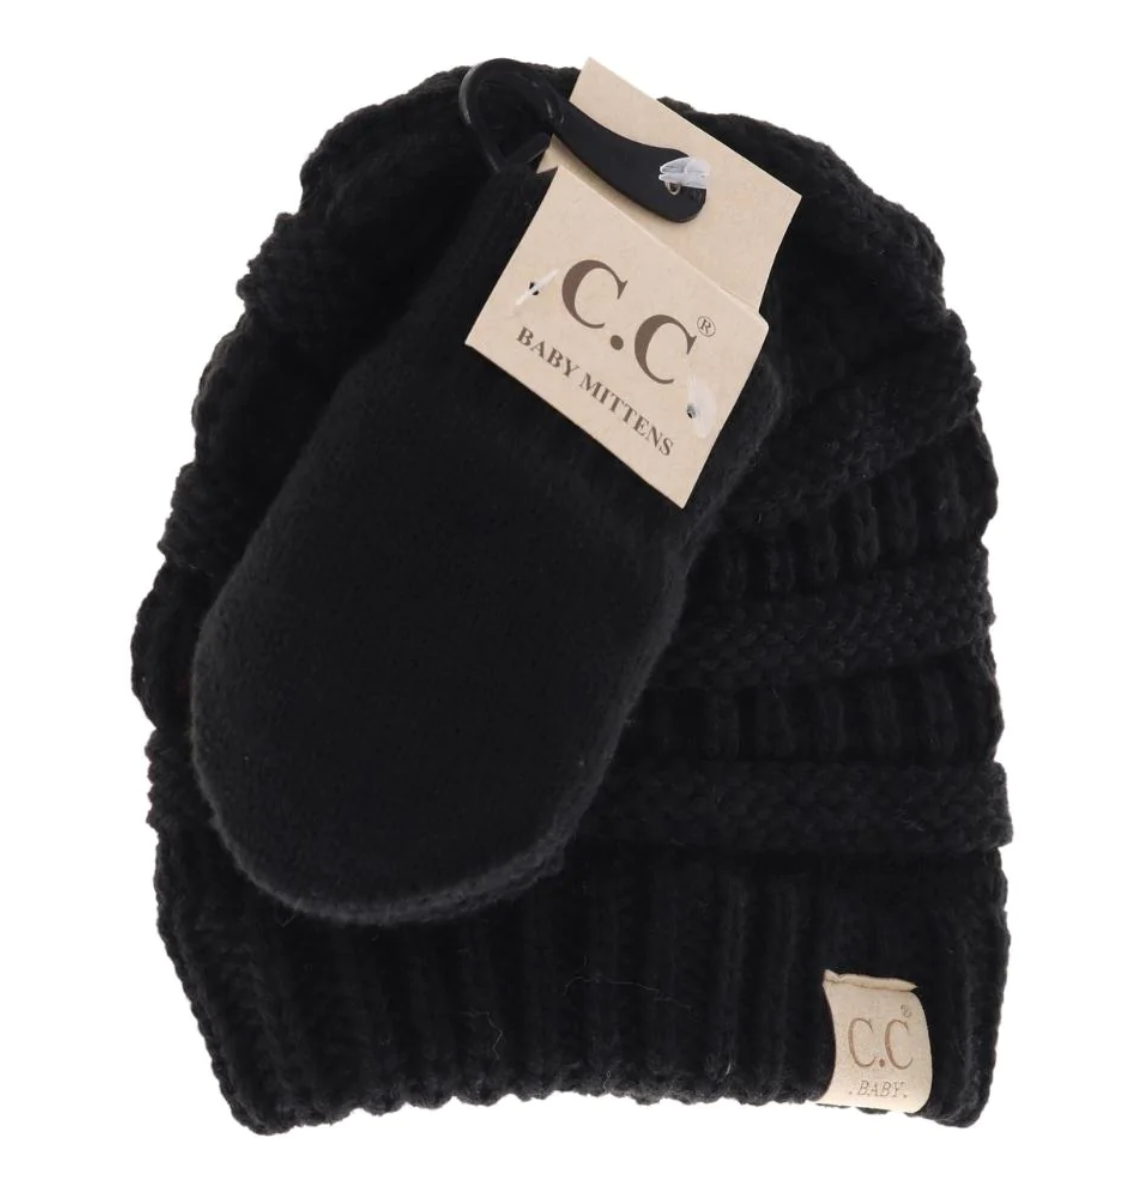 Baby Black Knit CC Beanie With Mittens